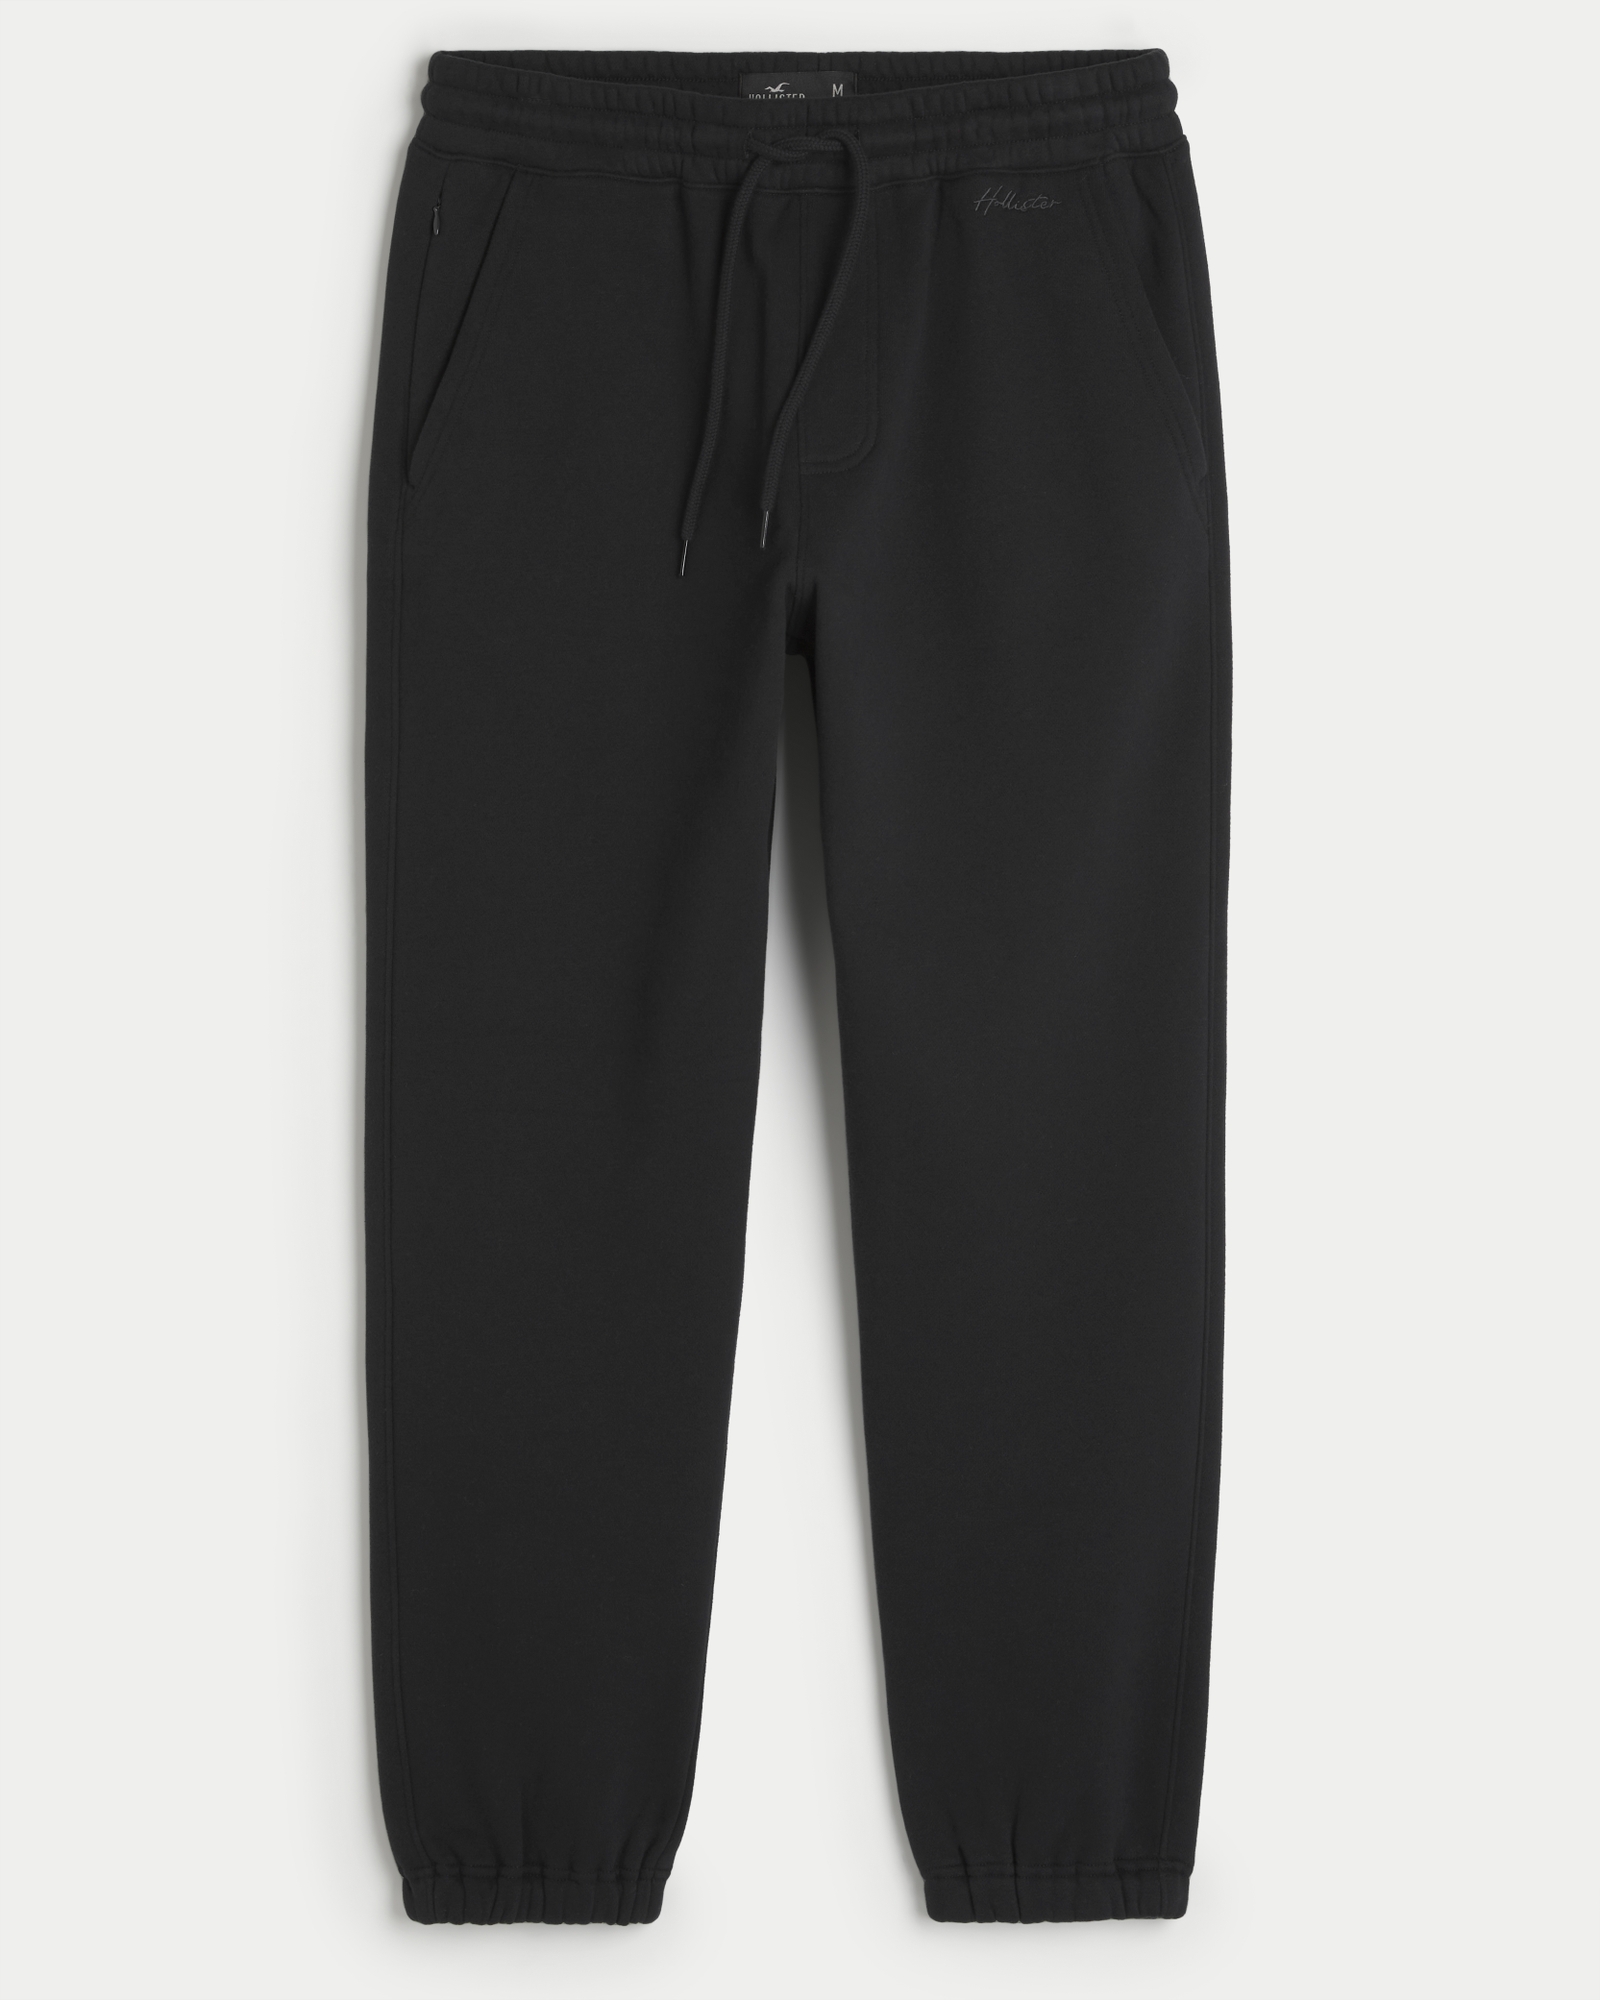 Hollister straight leg logo joggers in grey - ShopStyle Activewear